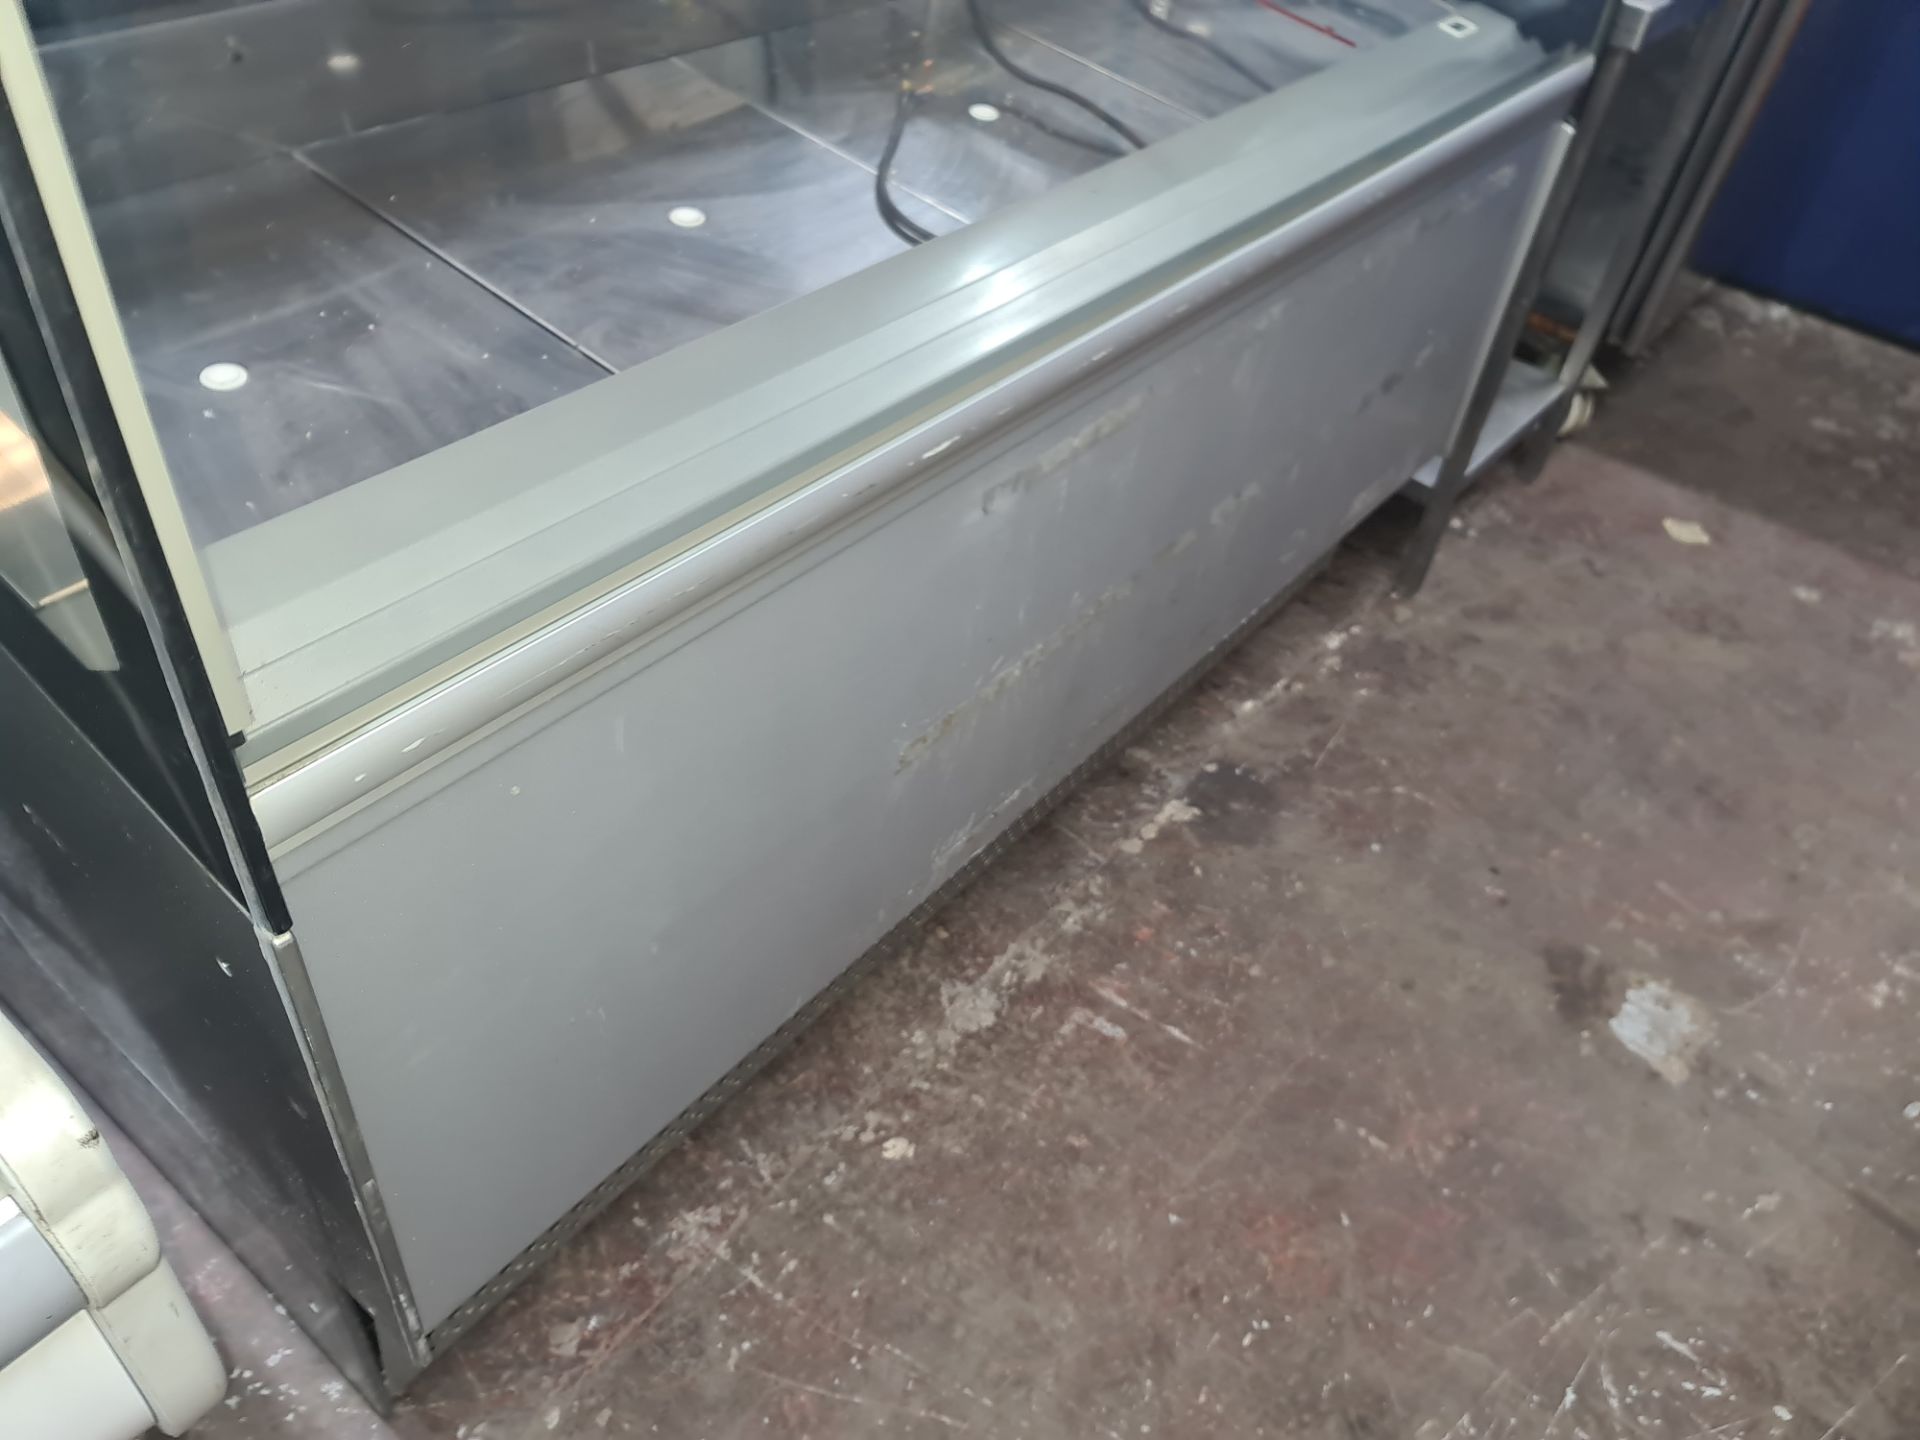 Millenium ST.18 refrigerated serve over counter, measuring approx. 1680mm x 1060mm x 1310mm - Image 6 of 6